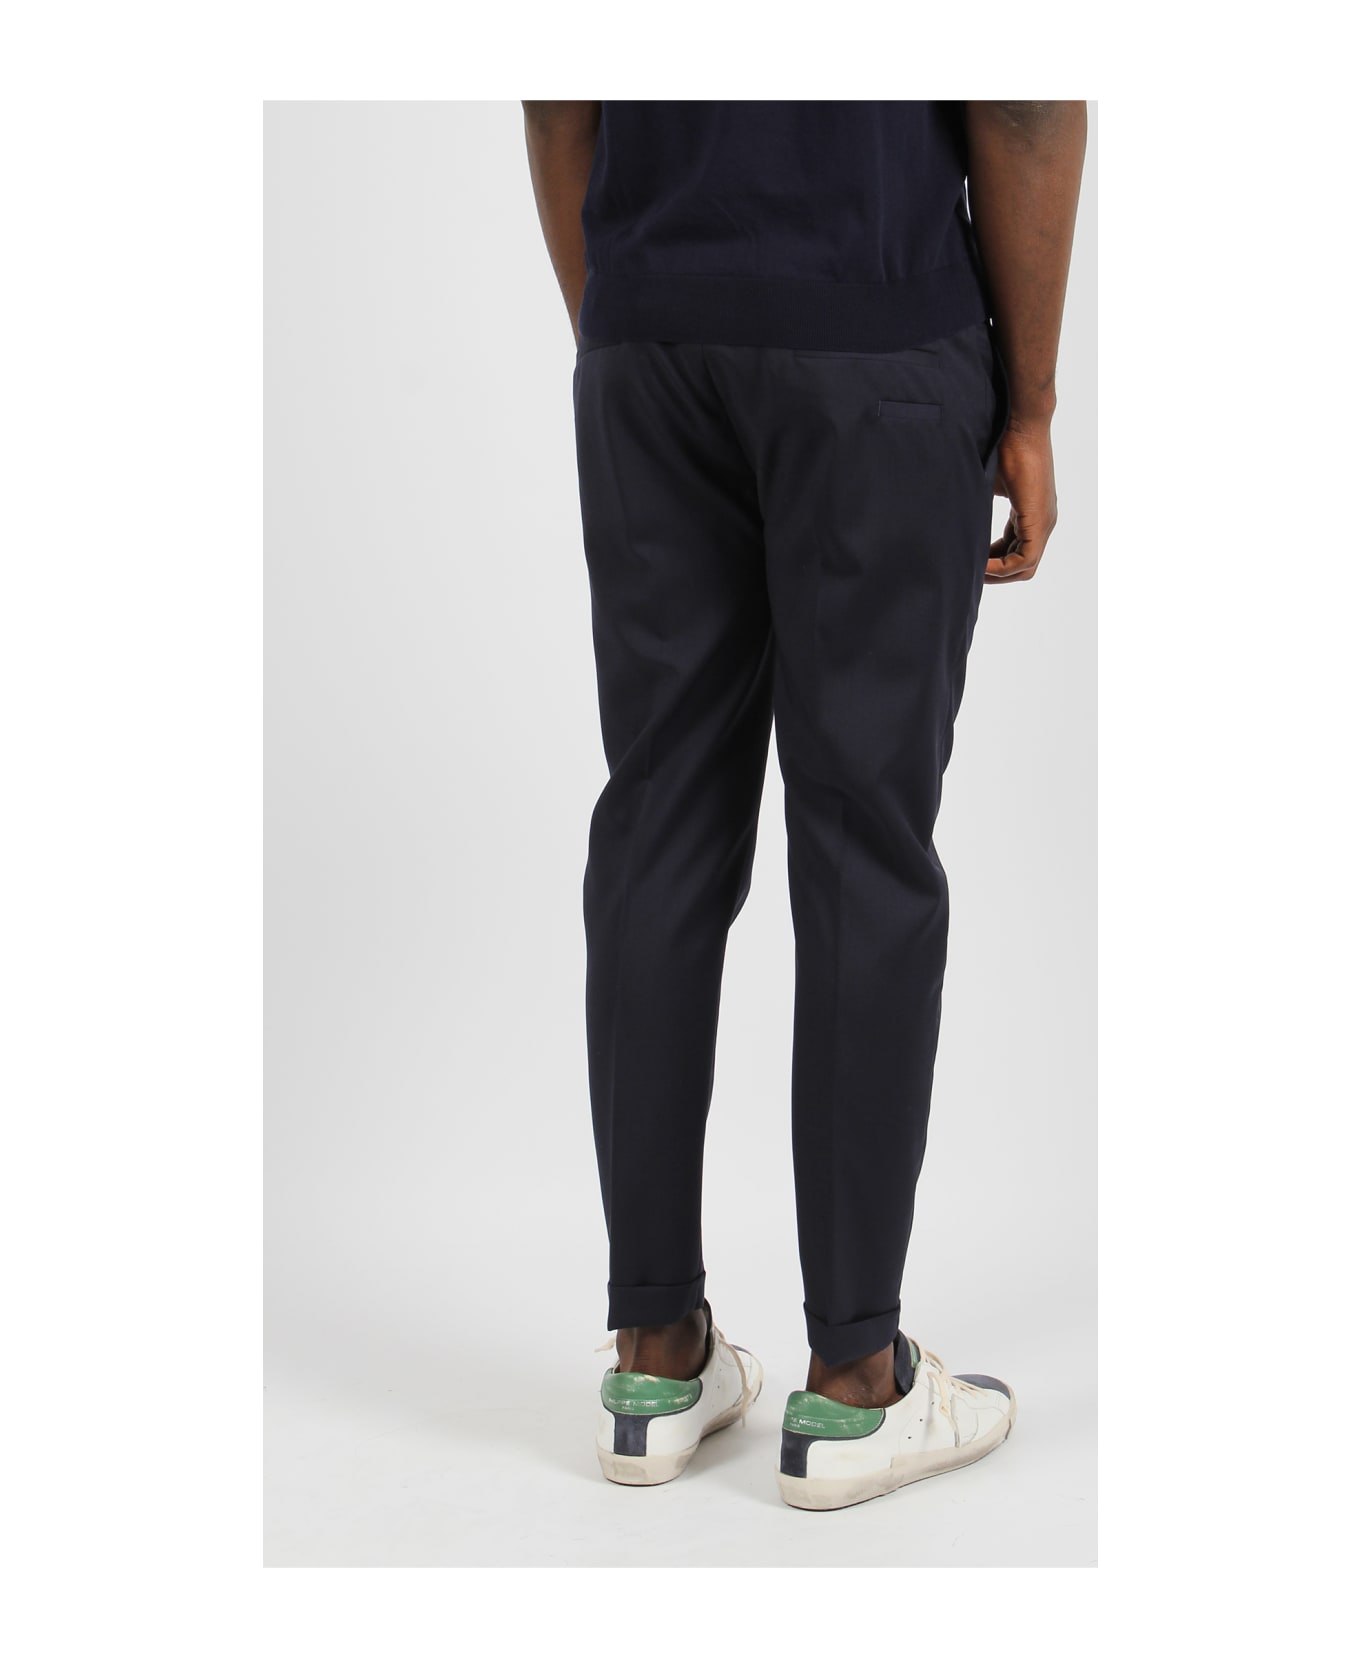 Low Brand Riviera Elastic Tropical Wool Trousers - Blue